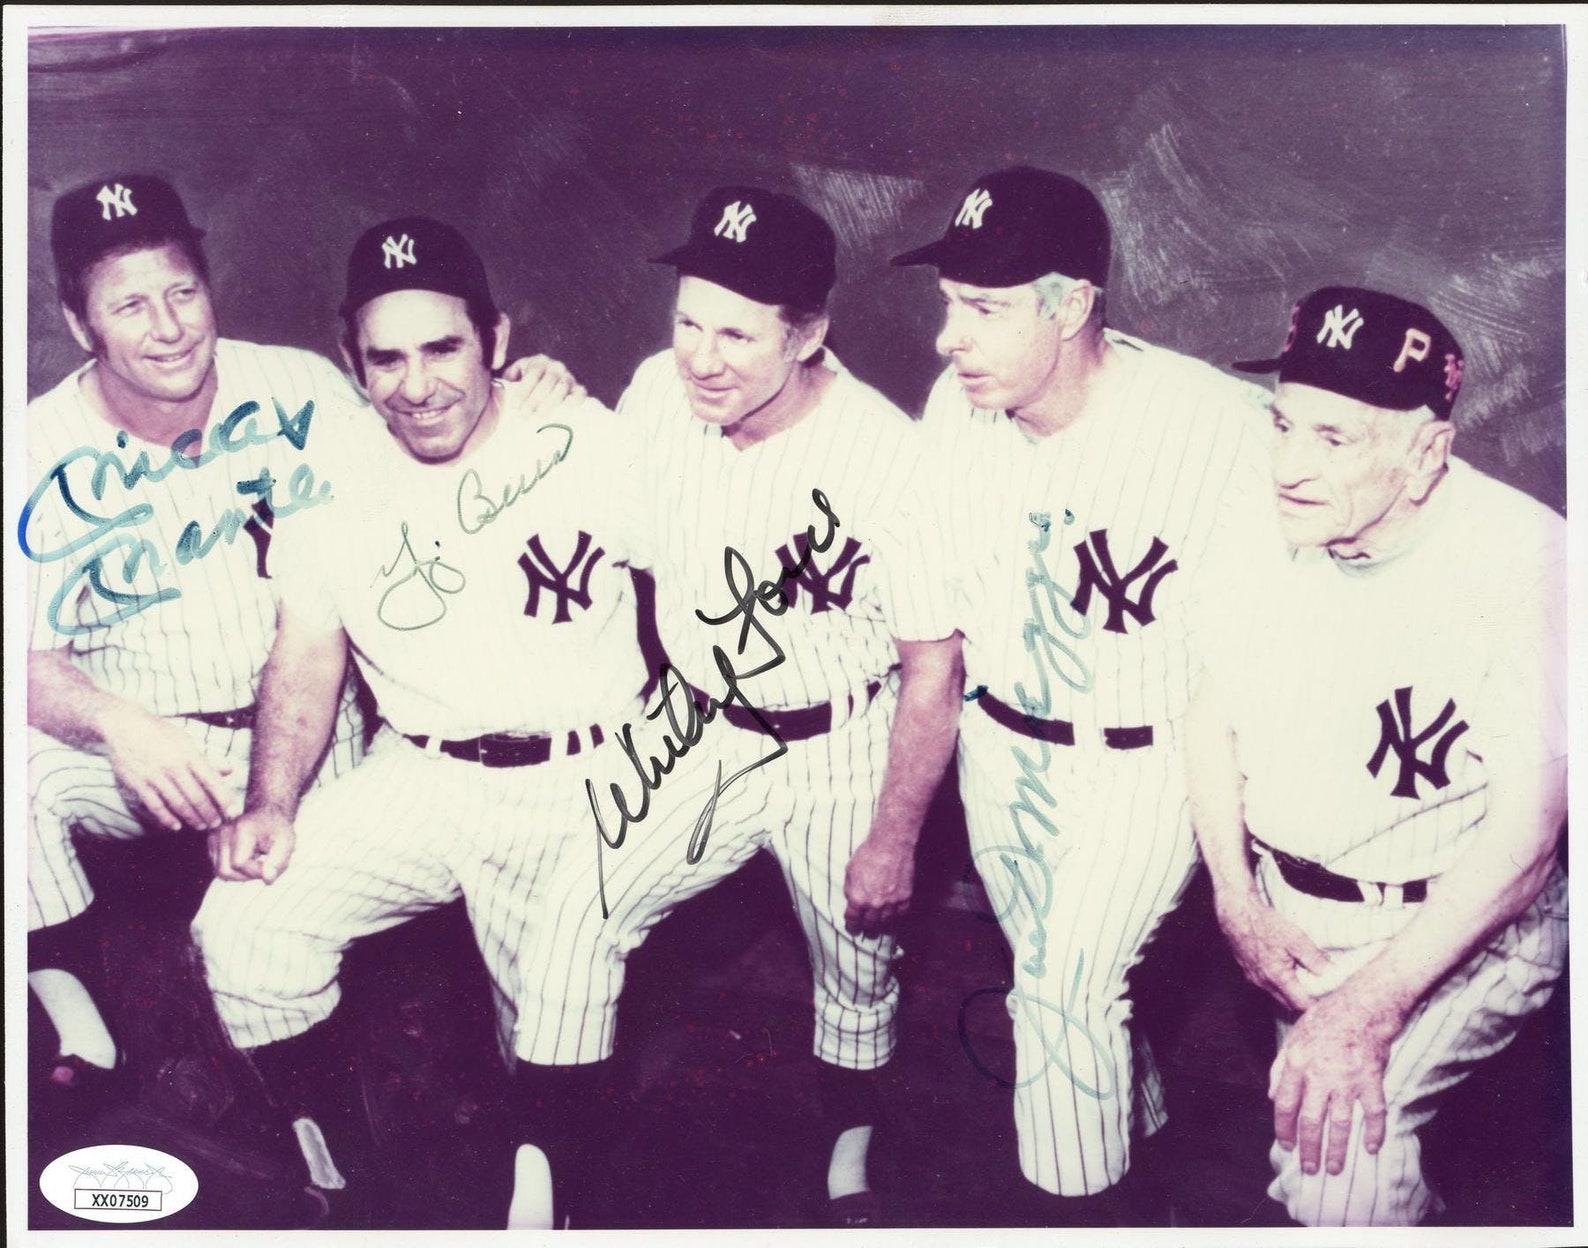 New York Yankees' game-worn Mickey Mantle autographed jersey could